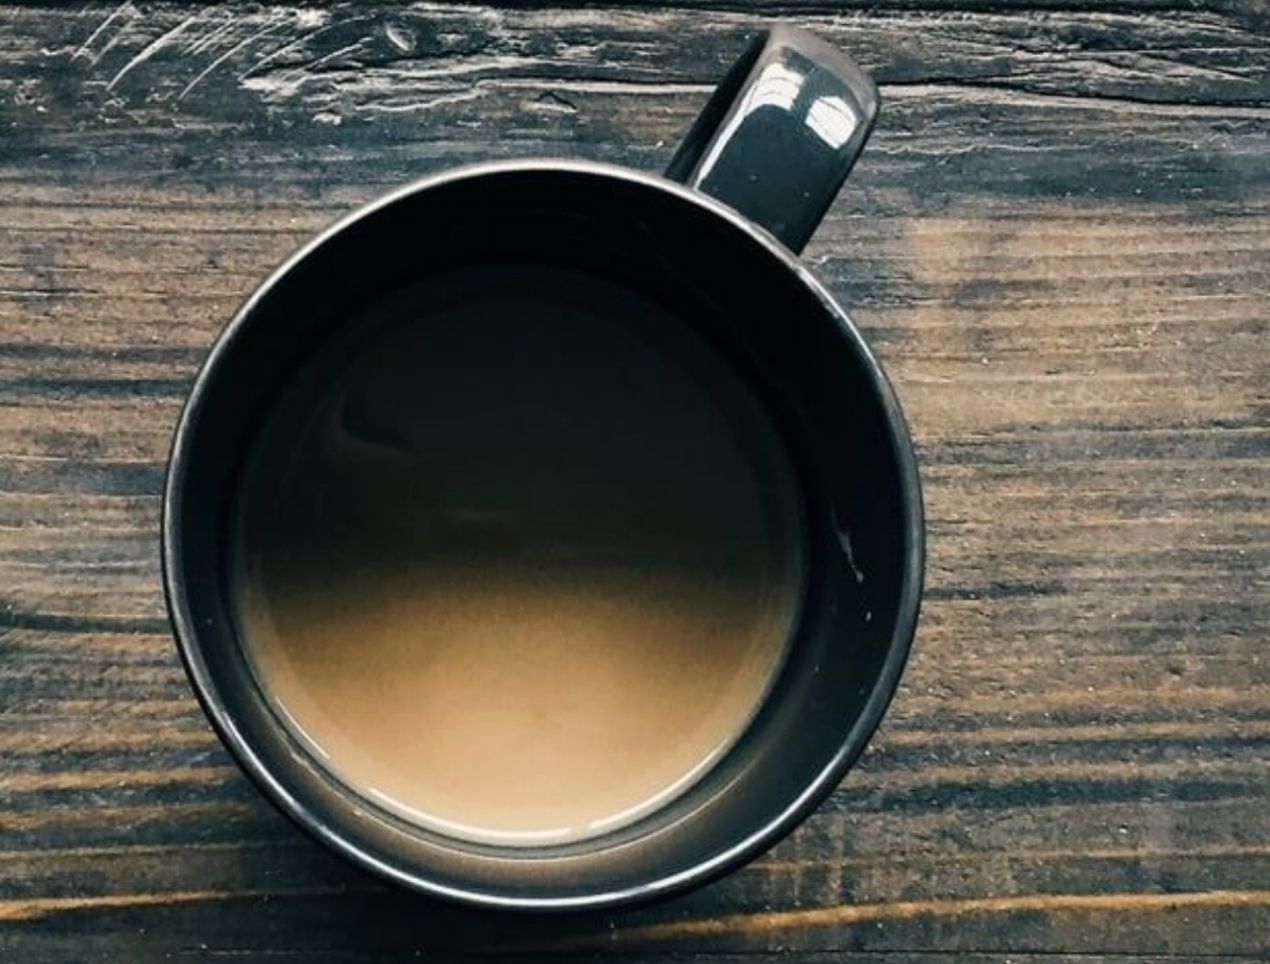 Image of what I believe to be a cup of coffee with cream, sitting on a dark wooden table. An overhead shot.